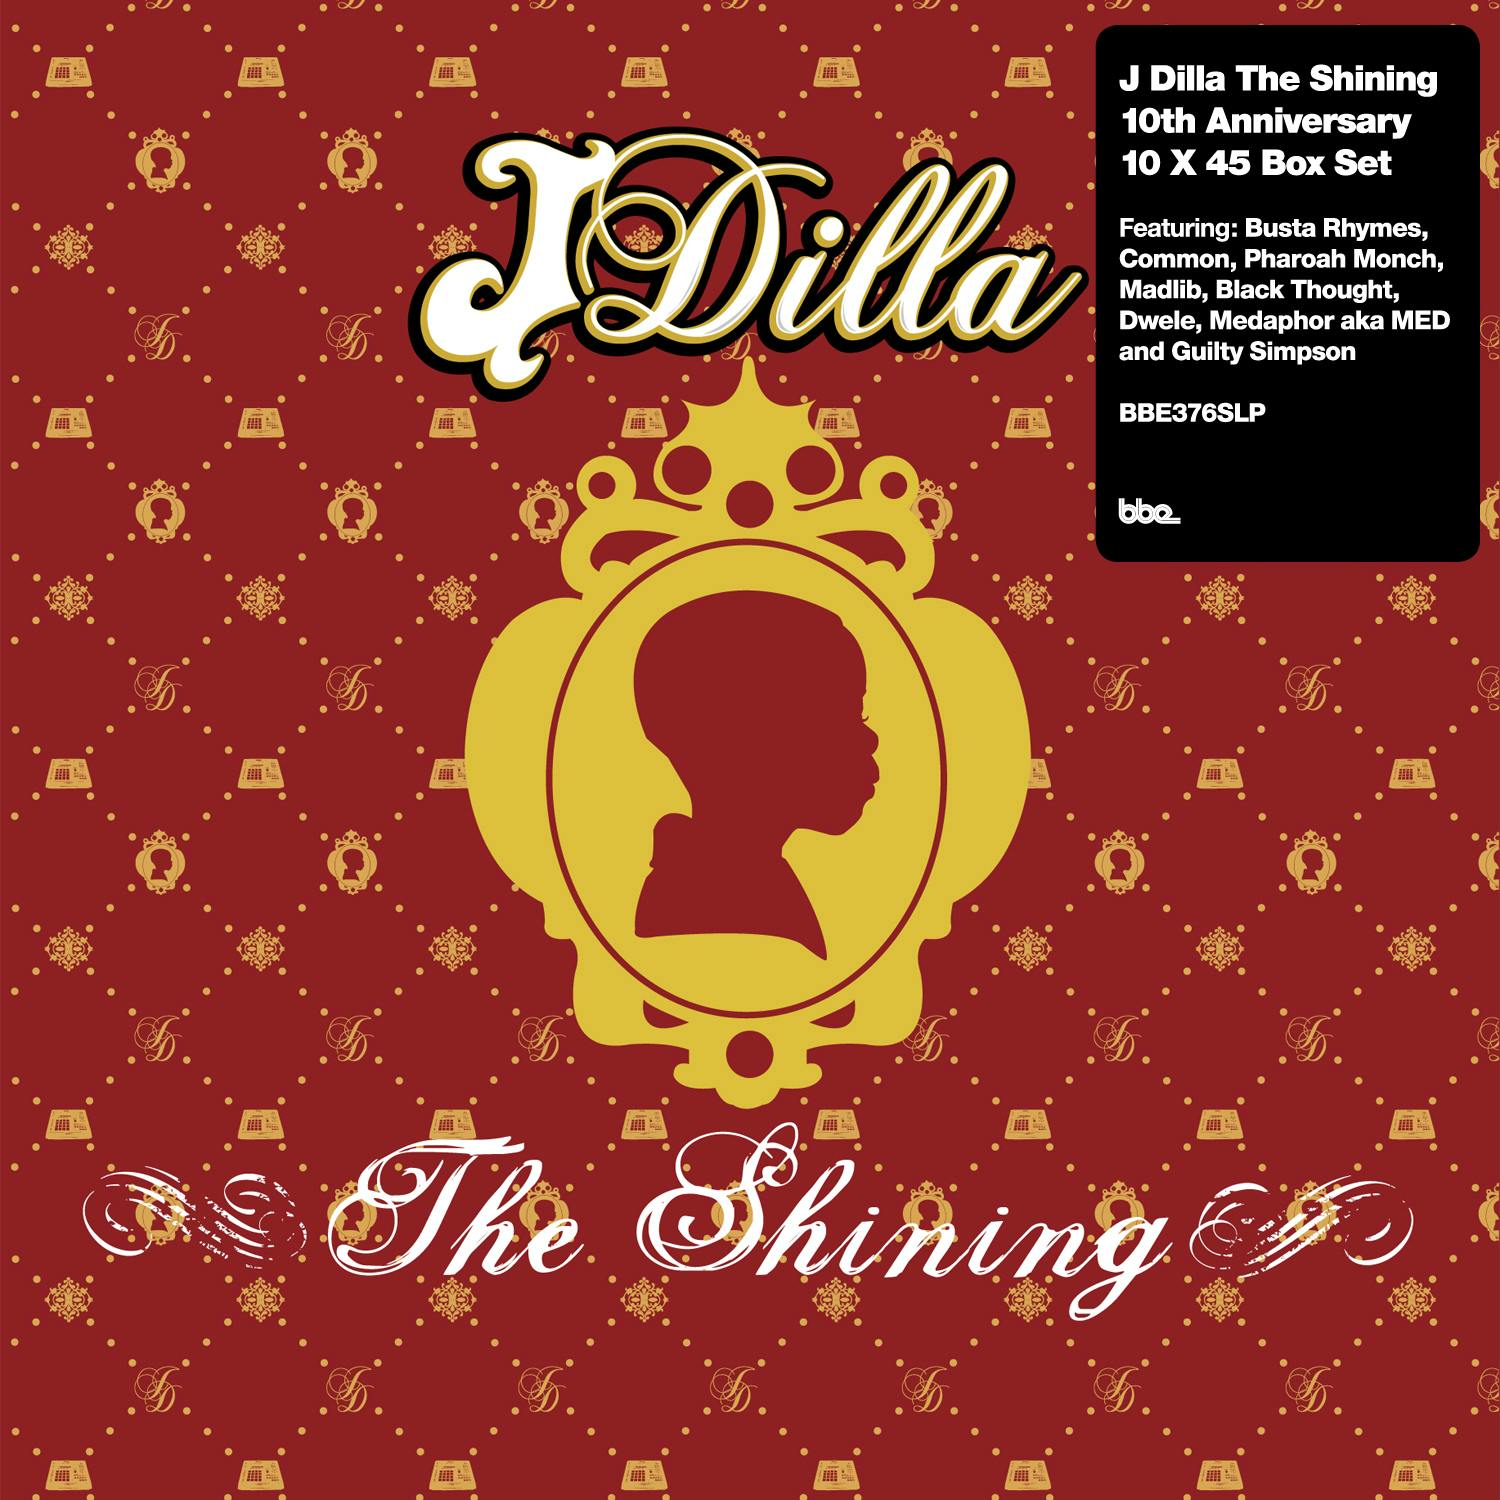 To mark the 10th anniversary of hip hop masterpiece 'The Shining', we’ve pressed J Dilla's final album on 7″ vinyl for the very first time.